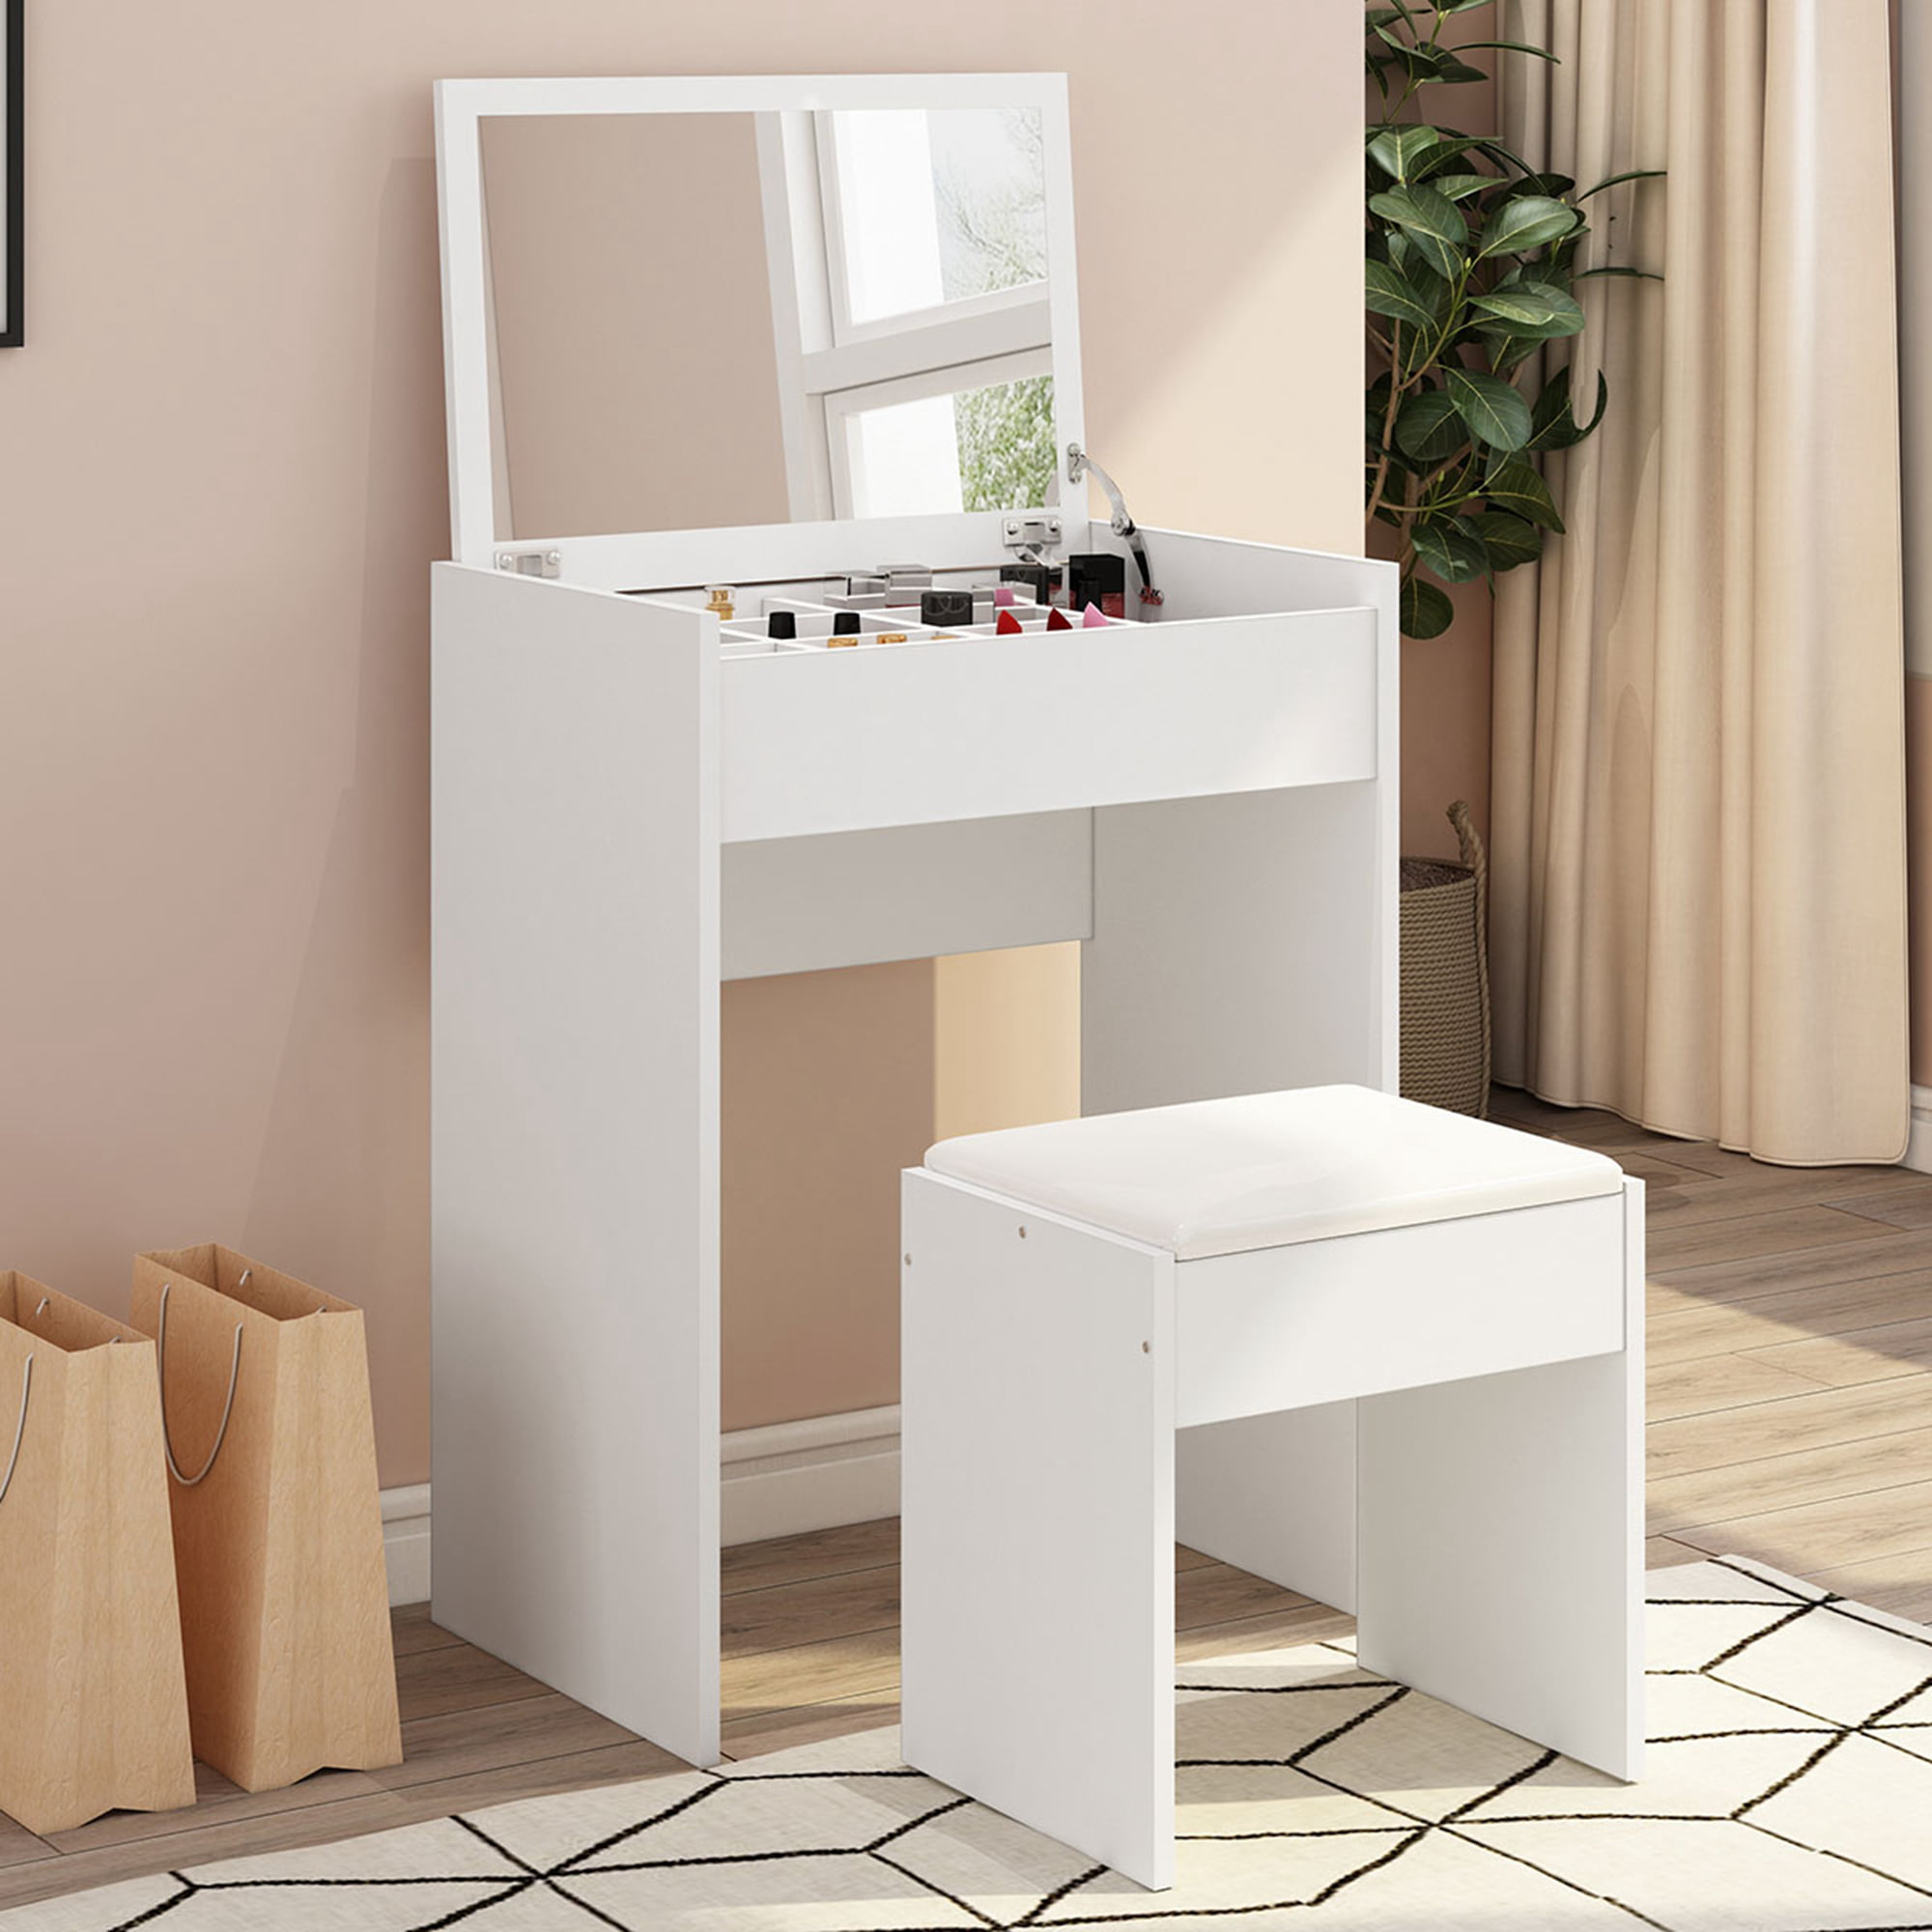 JAXSUNNY Vanity Table Set Make-up Dressing Table with Flip Top Mirror Cushioned Bench Bedroom Furniture of Ample Storage for Women/Girls,White 